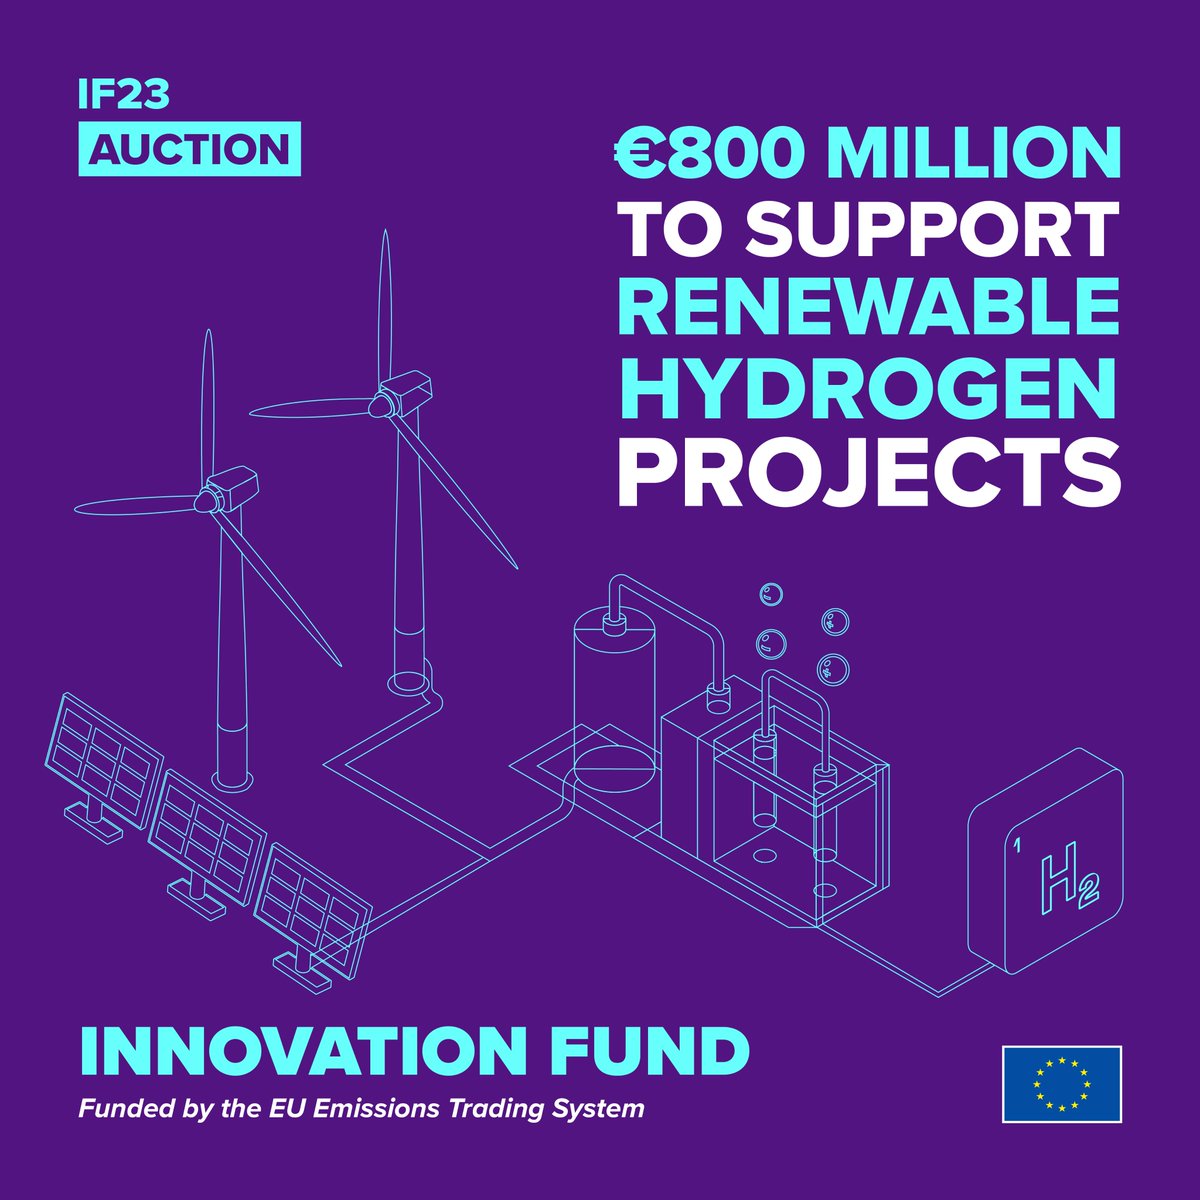 The clock is ticking⏰ The first ever 🇪🇺 #InnovationFund auction opens in 1️⃣ week. €800 million is available to accelerate renewable #hydrogen production in Europe 📈. Cutting-edge low-carbon technology will help us reach climate neutrality. Read➡️: climate.ec.europa.eu/news-your-voic…